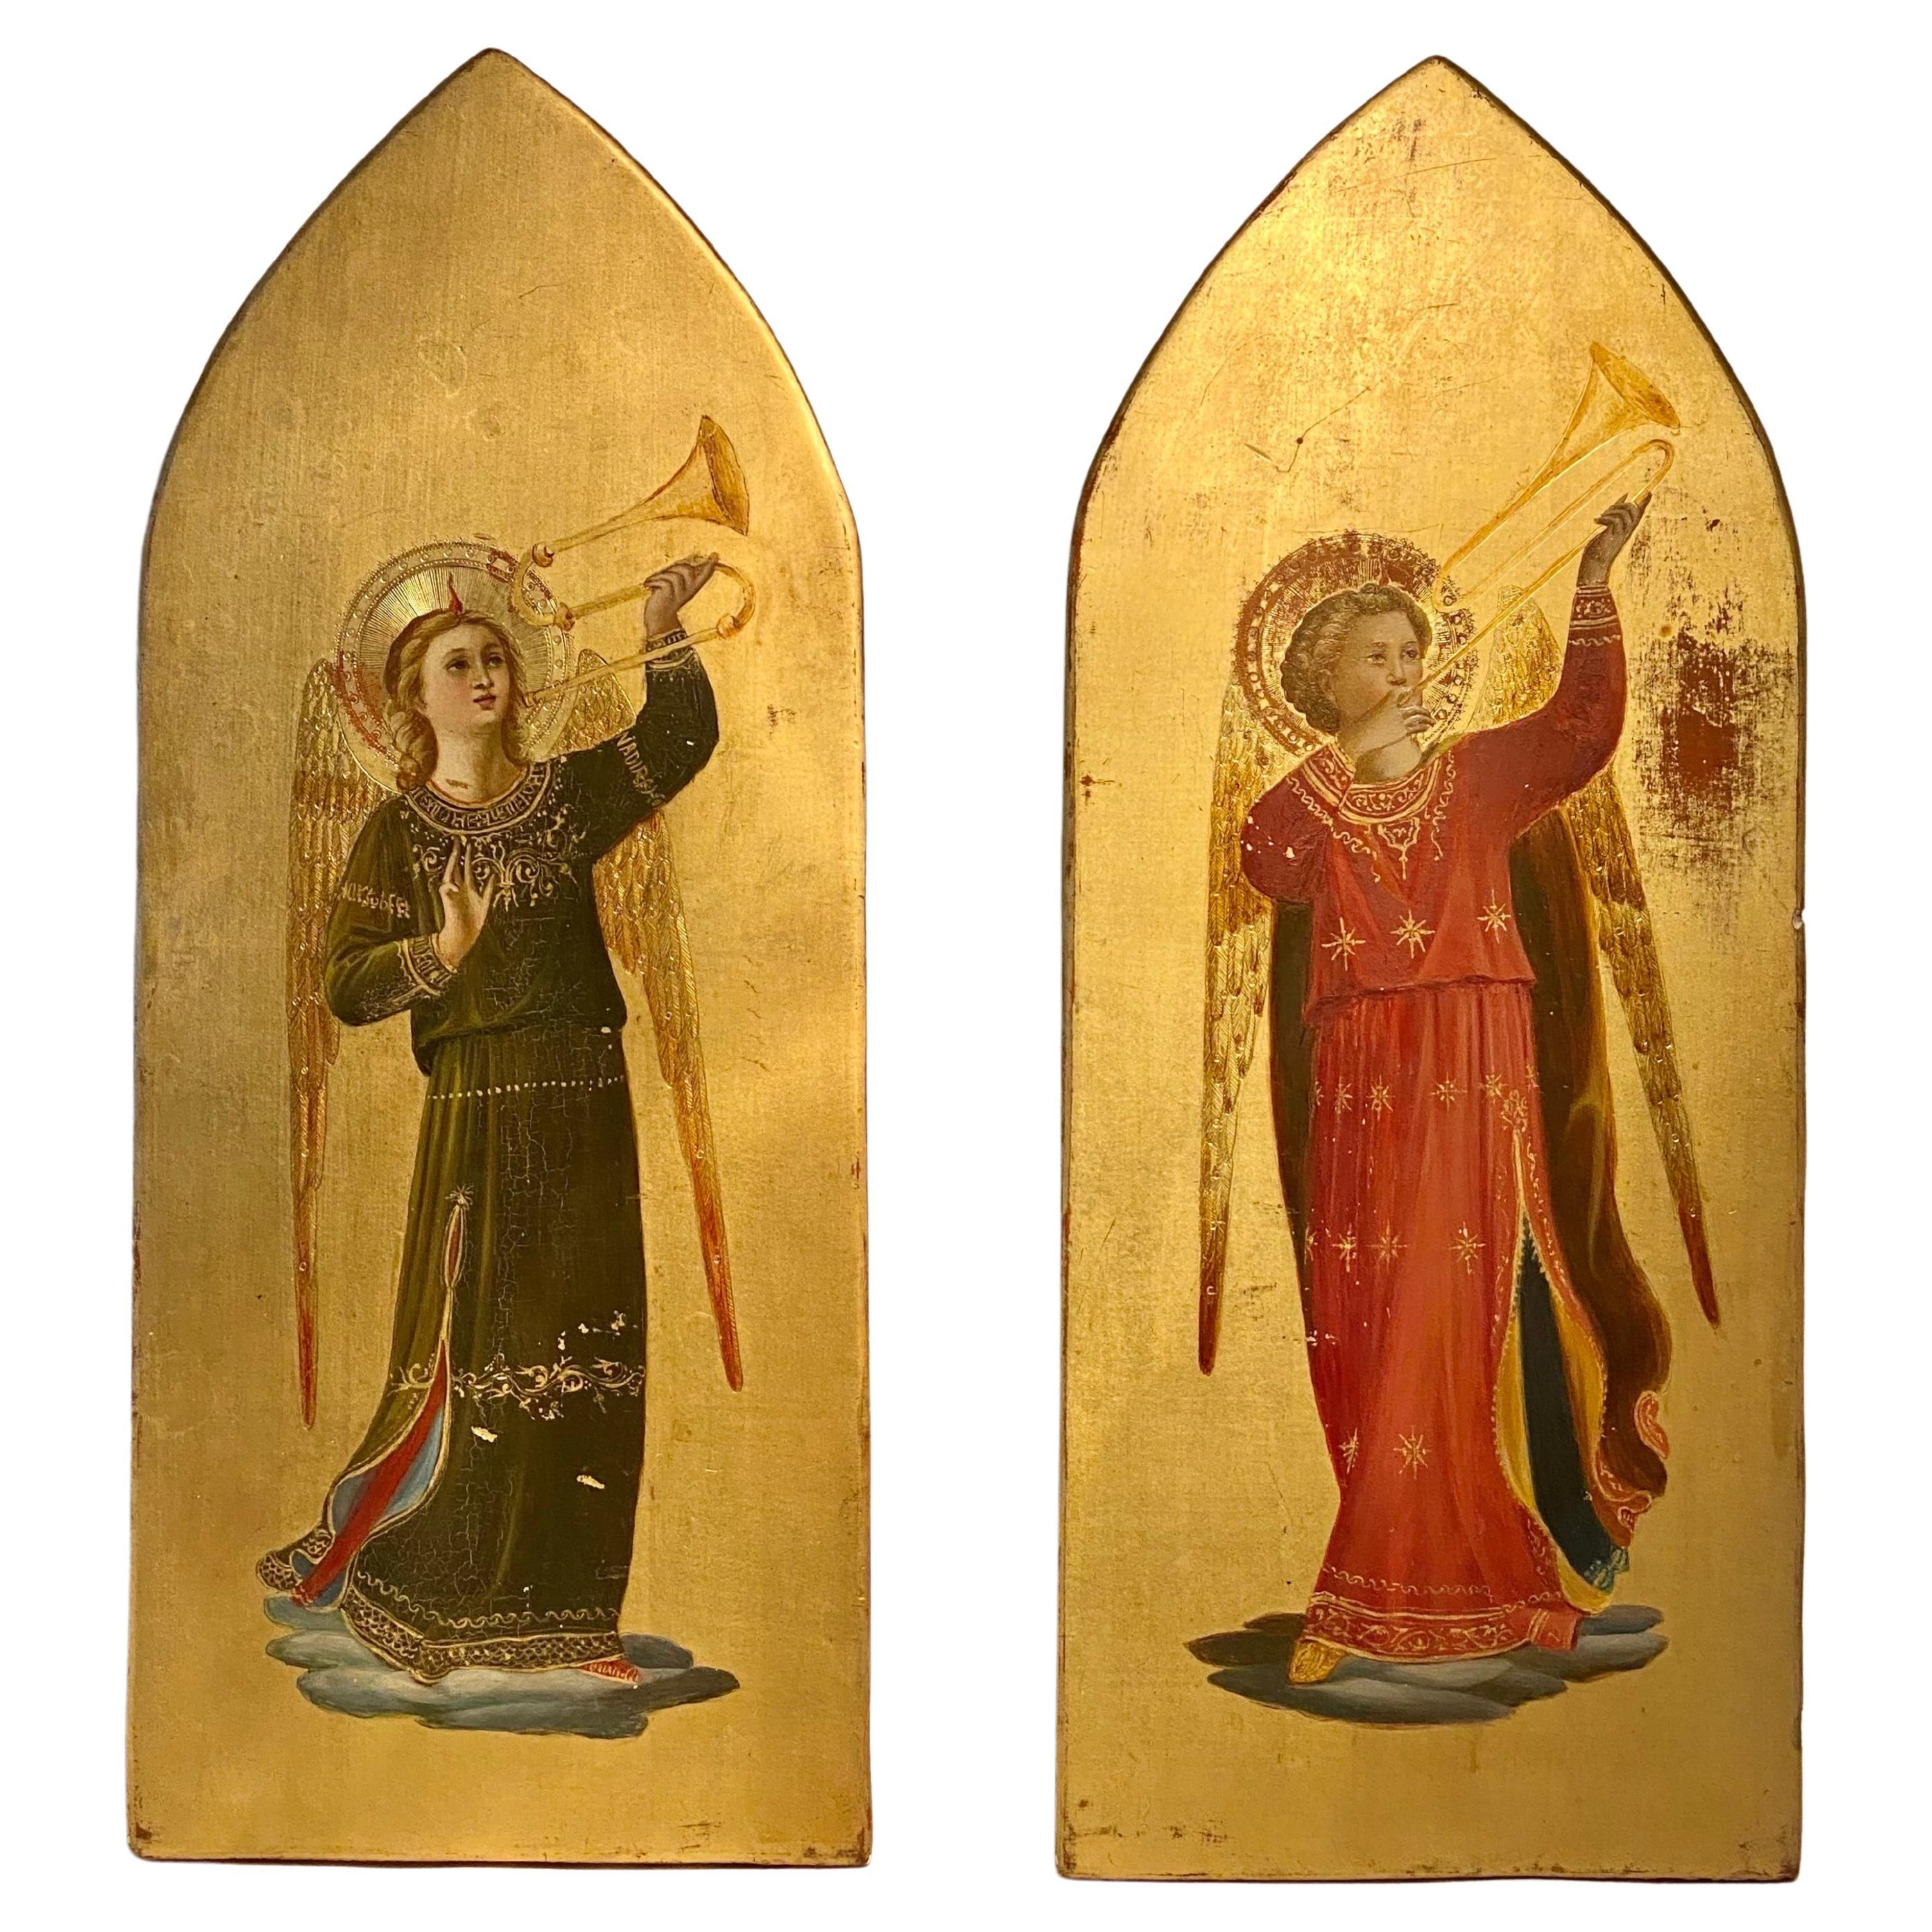 A delightful pair of paintings After Fra Angelico
Angels playing trumpets. Superbly painted in the 19th century.
A pair, both tempera and gilt paint on panel, arched tops.
They both have a red seal wax coat of arms on the back.
After the